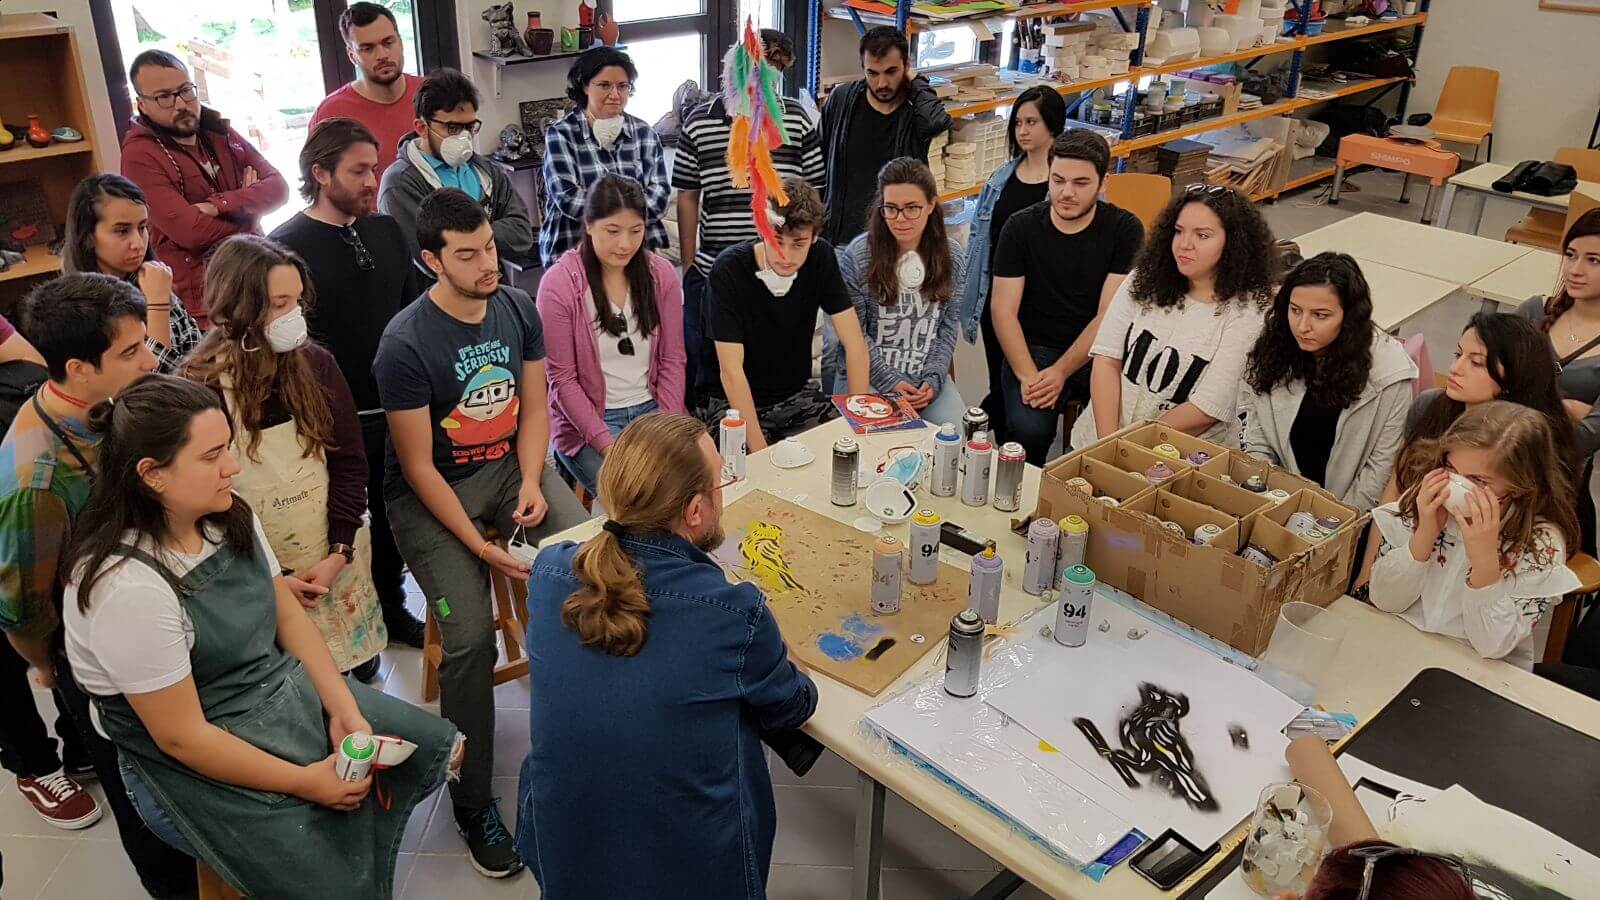 Academic Member of the Near East University Faculty of Fine Arts and Design, Assoc. Prof. Dr.Erdoğan Ergün, realised an Artistic Workshop at the METU MarchFest Culture and Art Festival